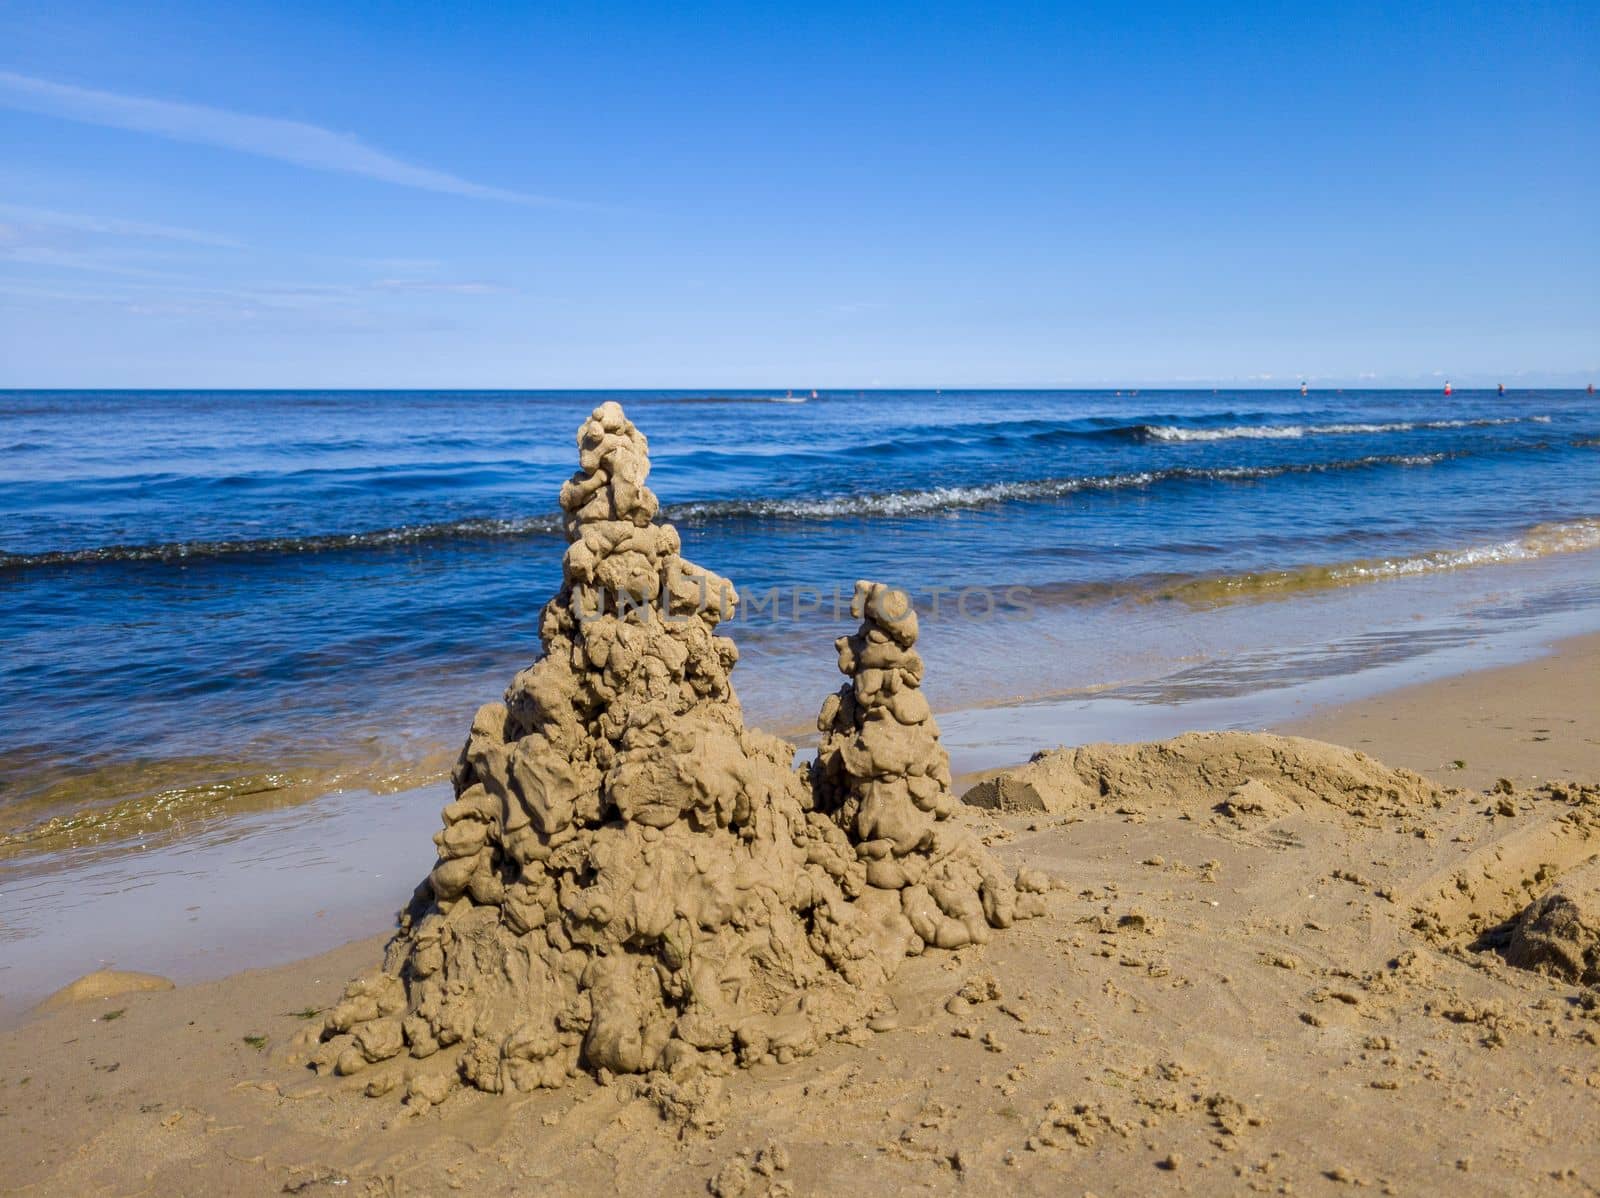 Built House sand castle with towers on the south shore of the sandy beach blue sea.